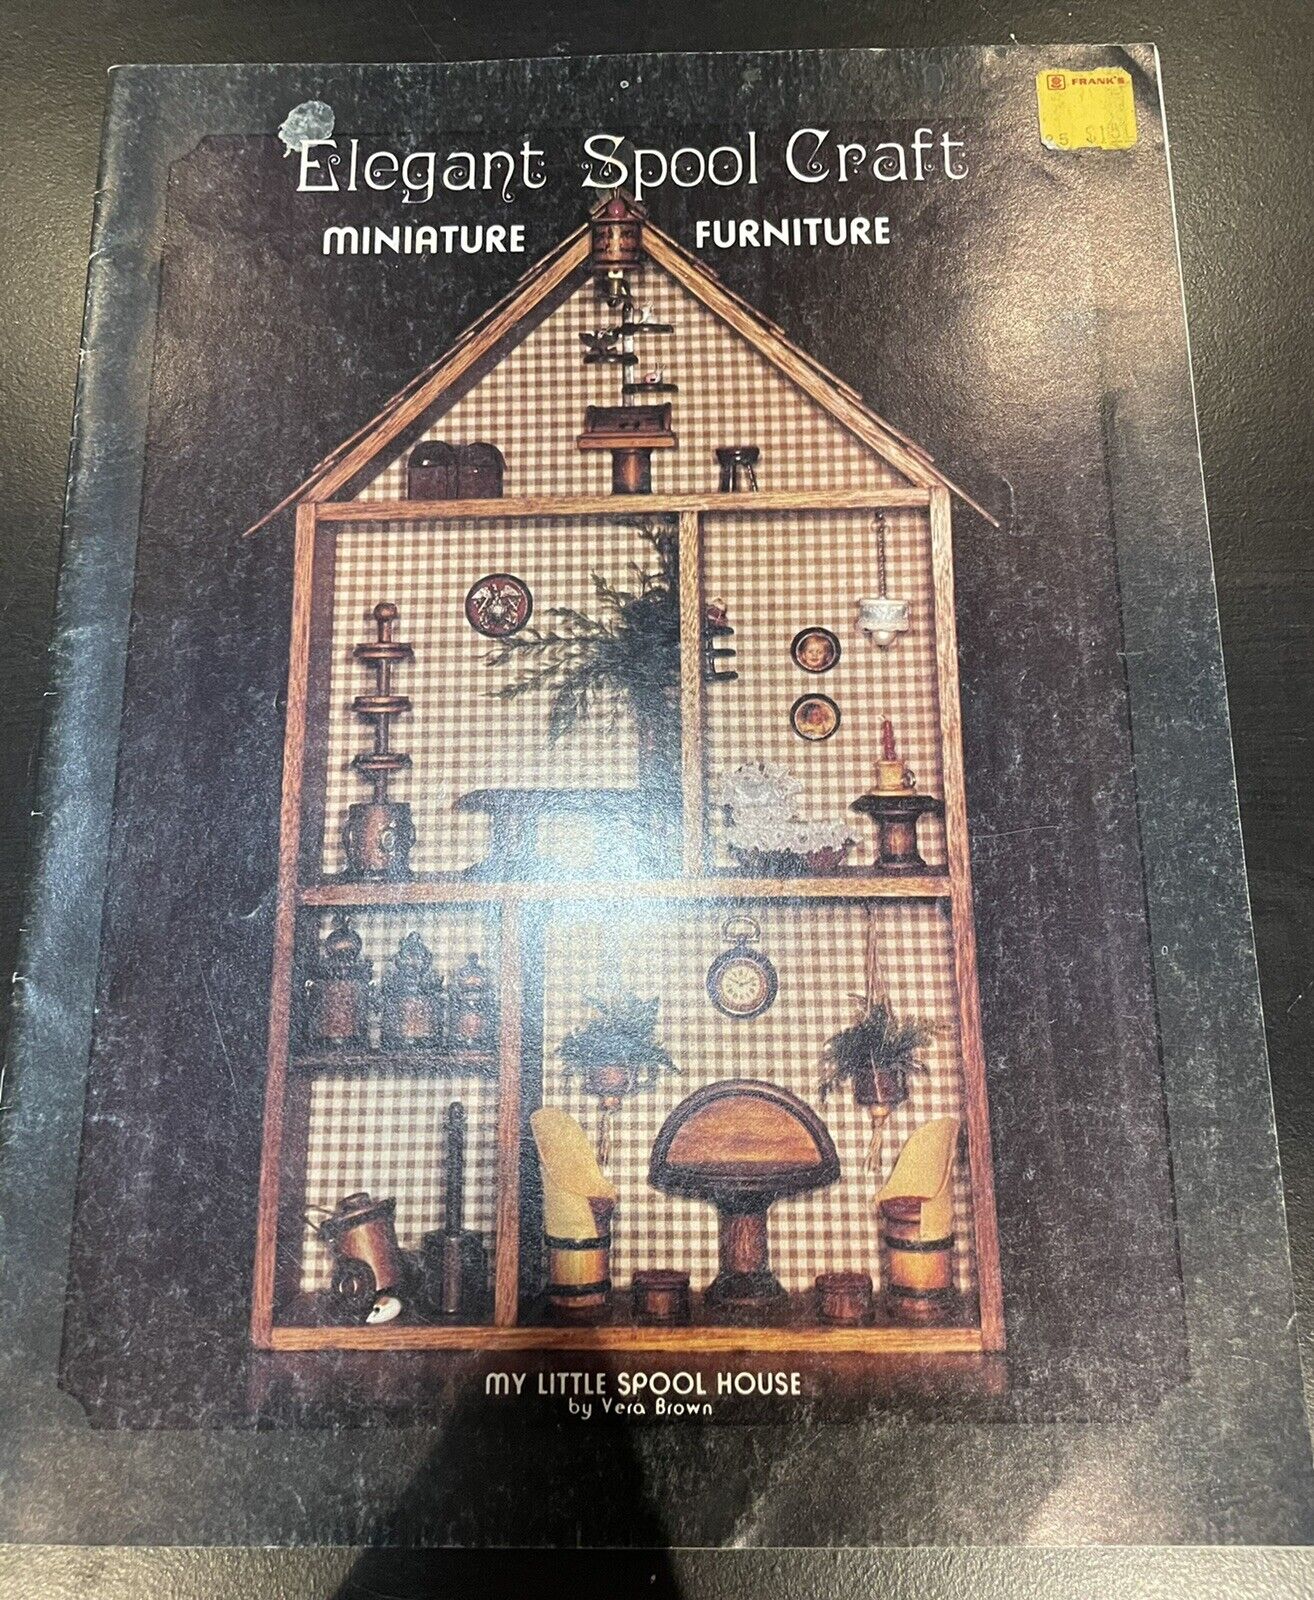 Elegant Spool Craft Book   Miniature Furniture   7 Projects To Make    Used 1976